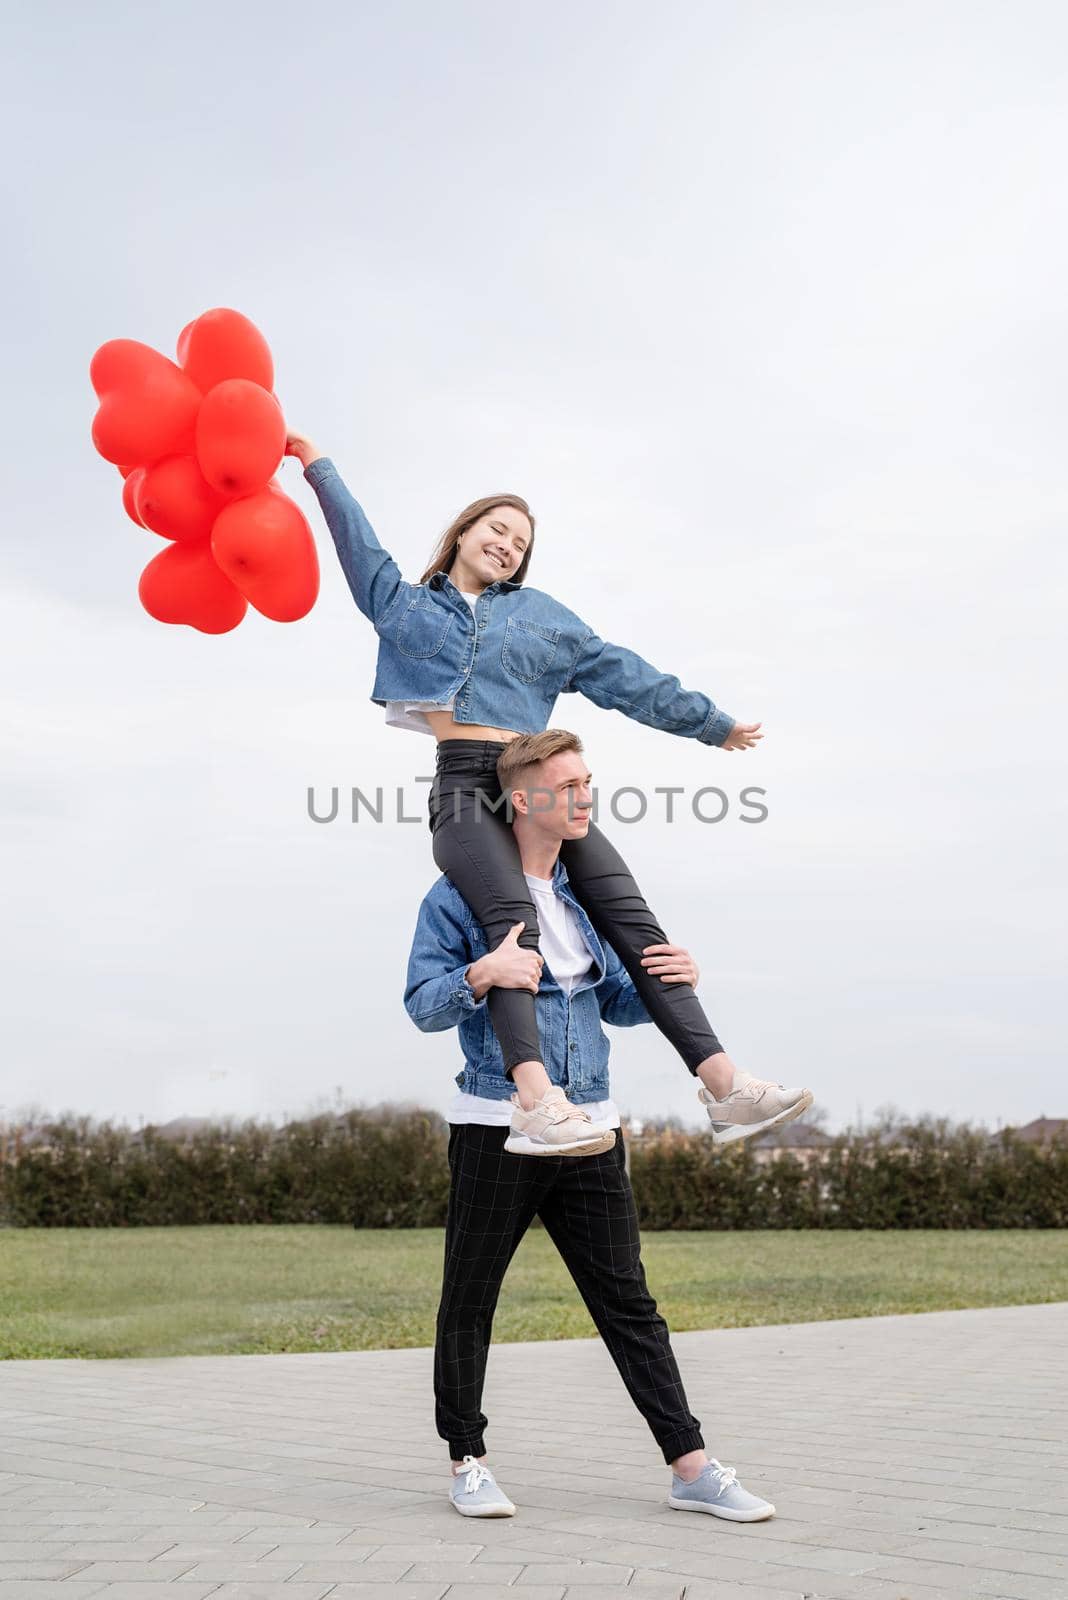 young loving couple with red balloons embracing outdoors having fun by Desperada